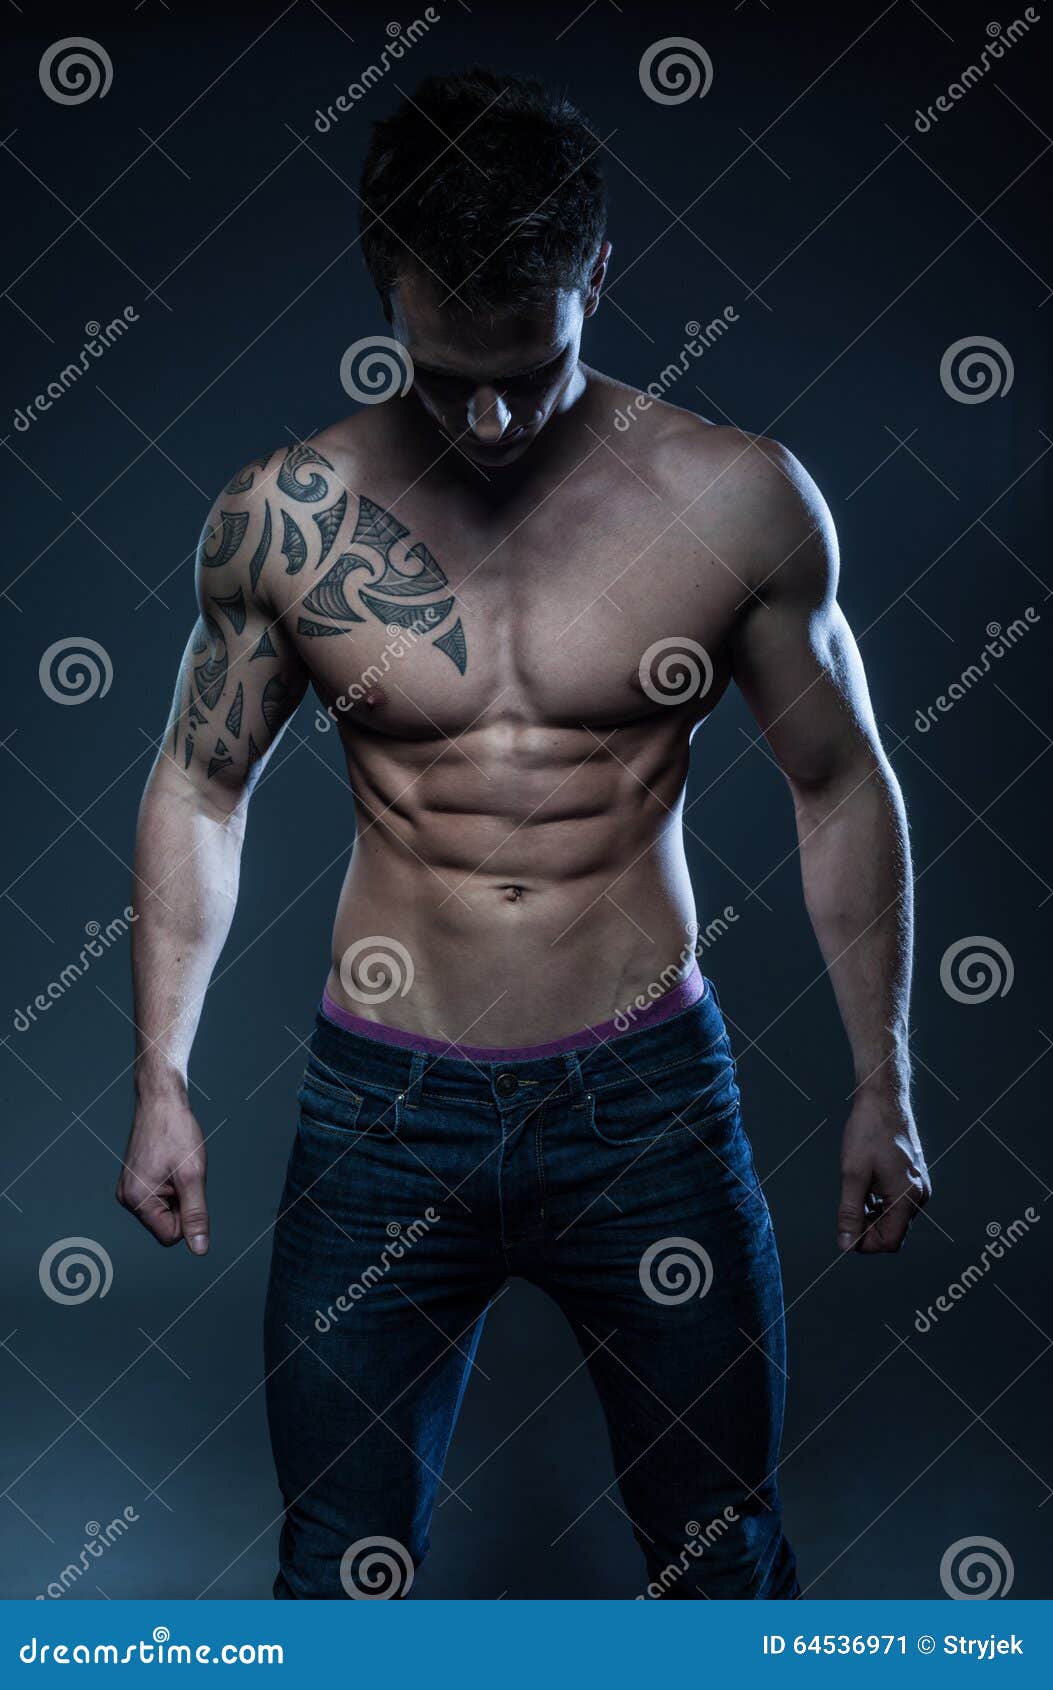 Male Fitness Model With The Tattoo Stock Image - Image of ...